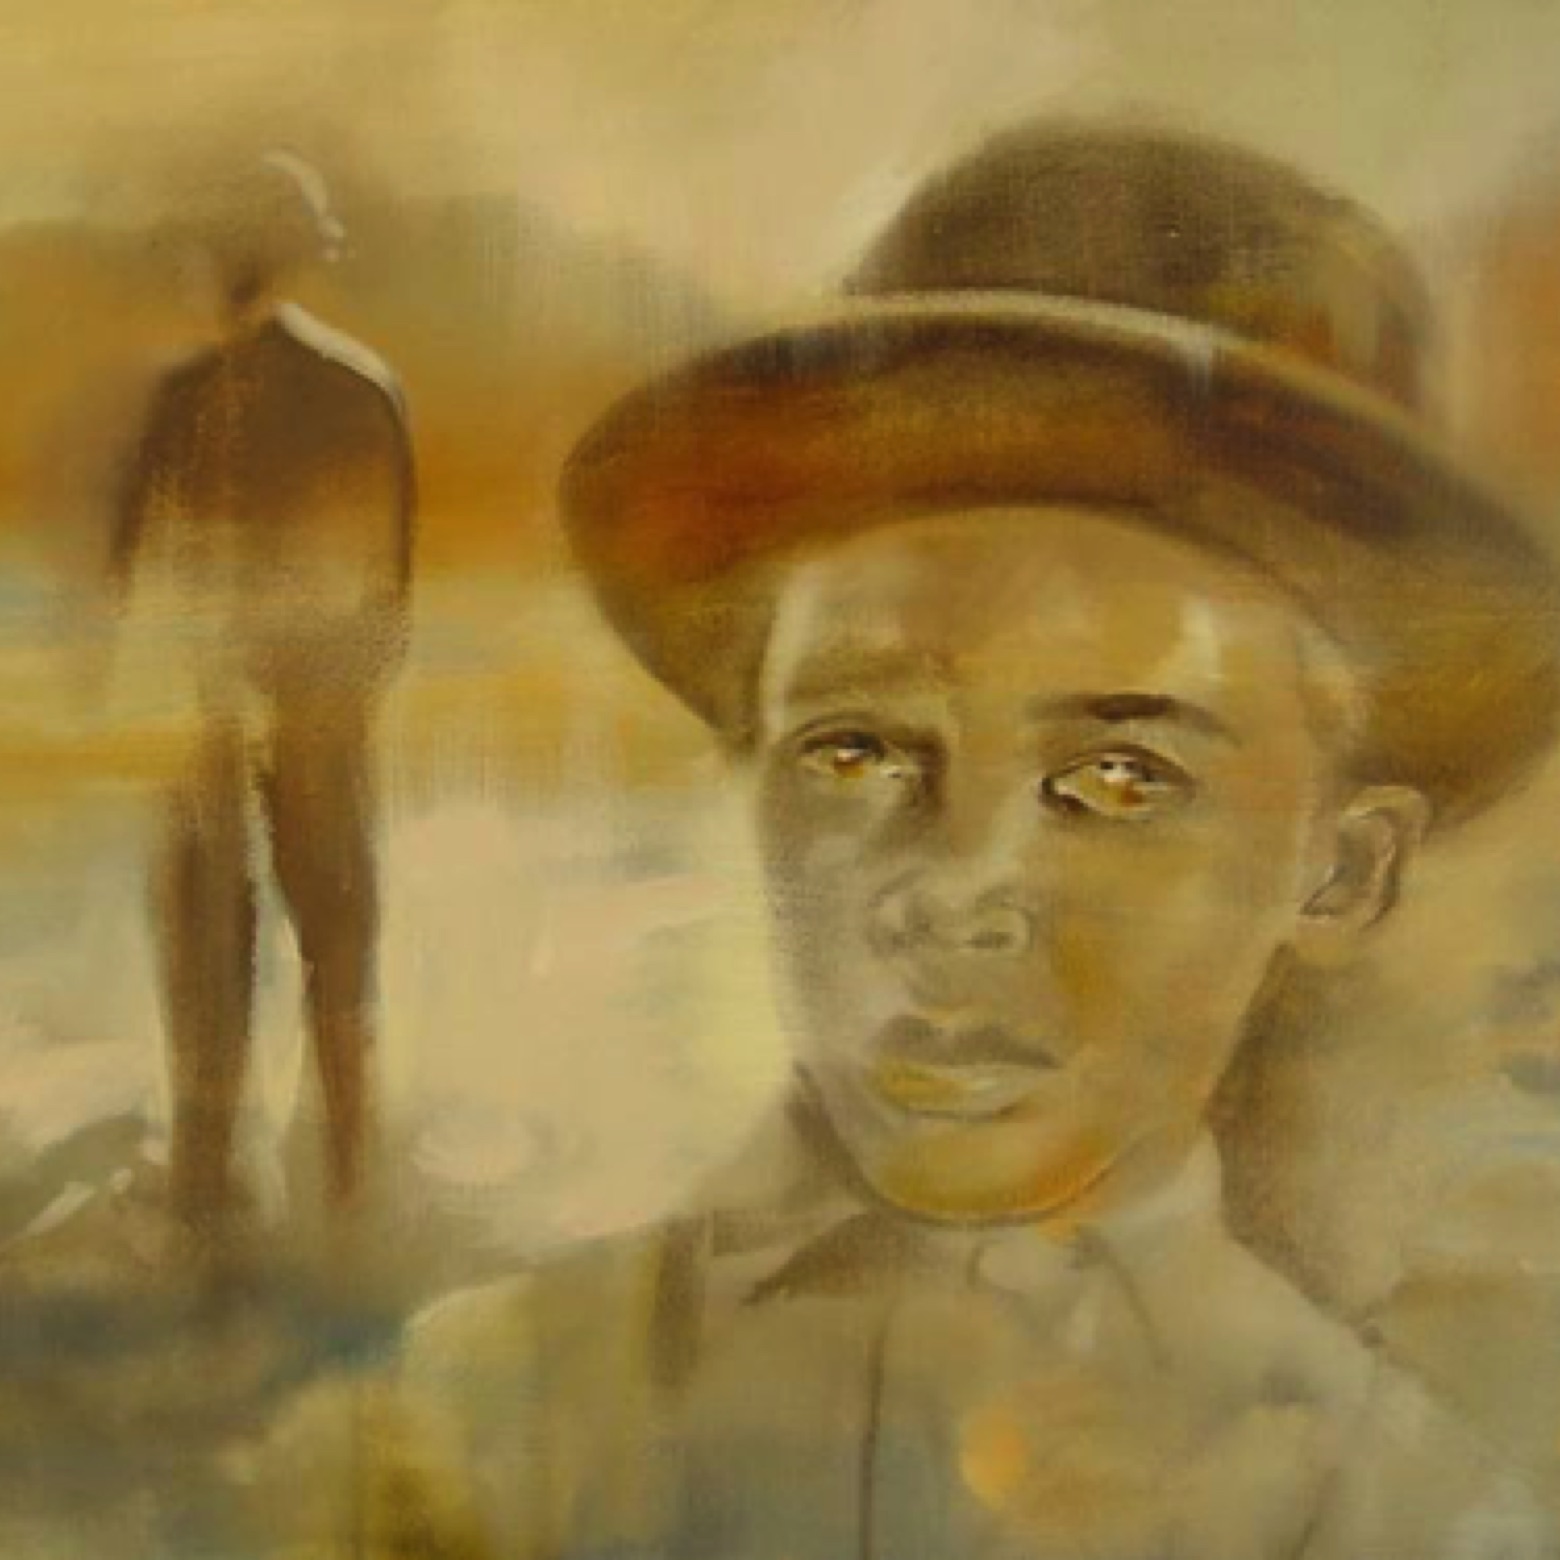 Gregg Chadwick
Call and Echo
24”x30” oil on linen 2011-2018
The young man in Call and Echo has been seen by many viewers as an homage to Emmett Till. Not a description of the unspeakable violence enacted on that young man in the 1950’s, but instead as a human being with personhood, with a face of innocence and cause.